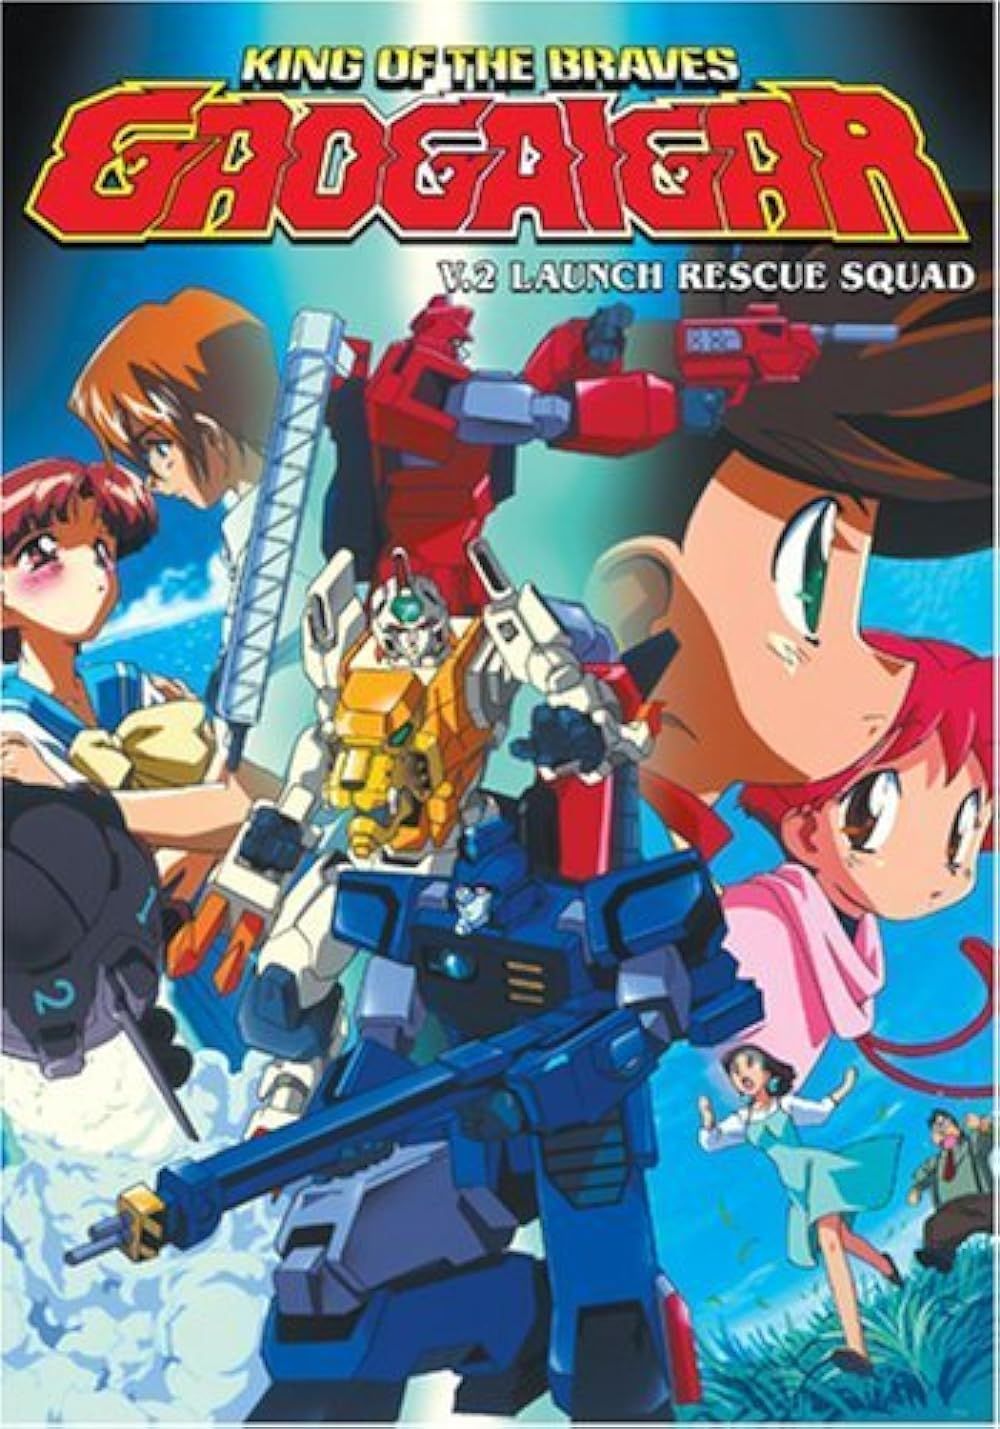 The King of Brave GaoGaiGar poster